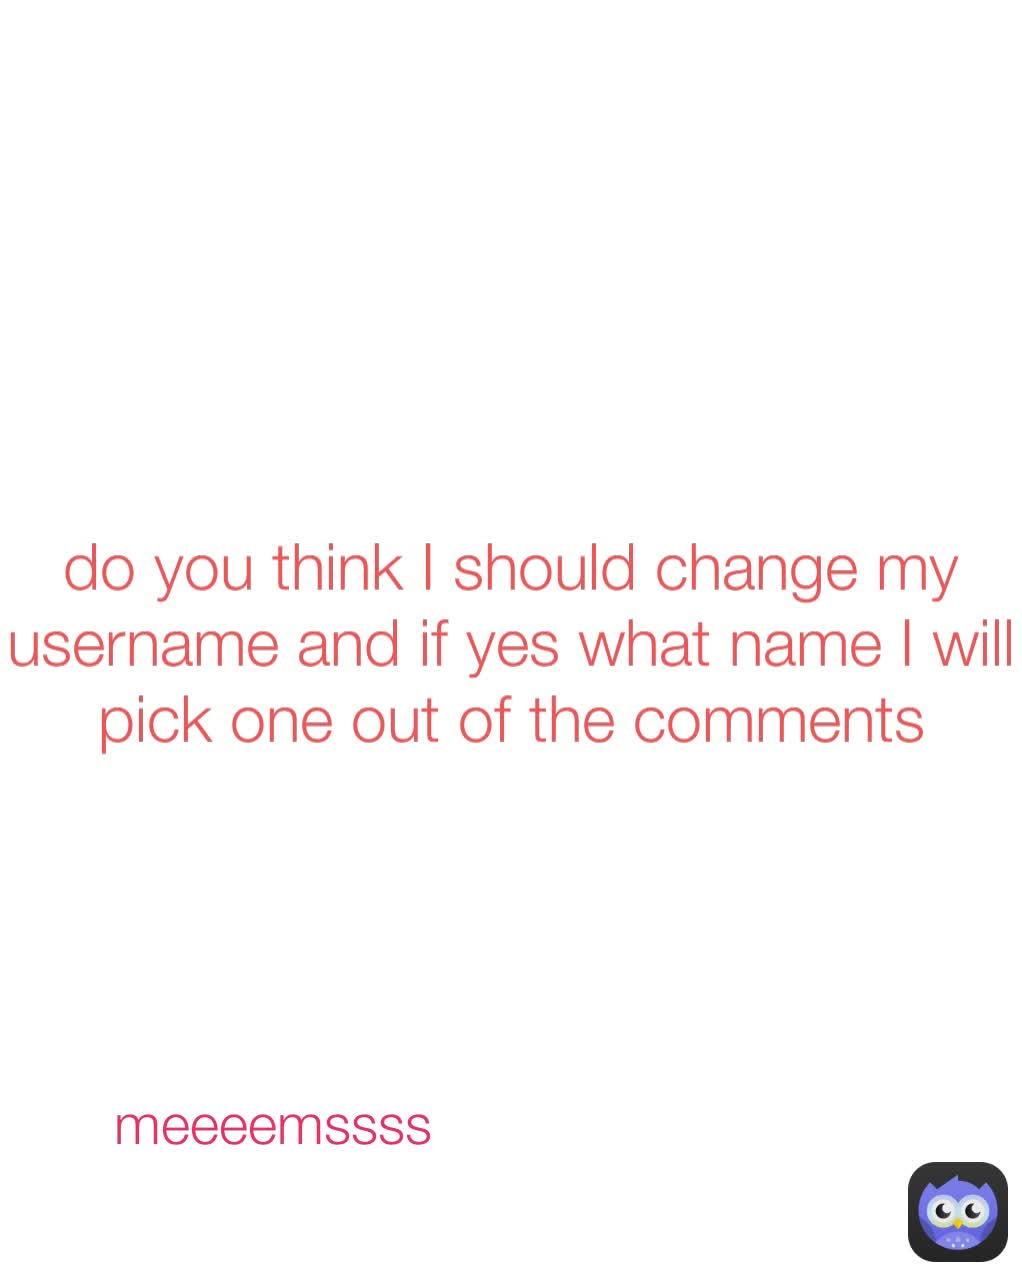 meeeemssss do you think I should change my username and if yes what name I will pick one out of the comments